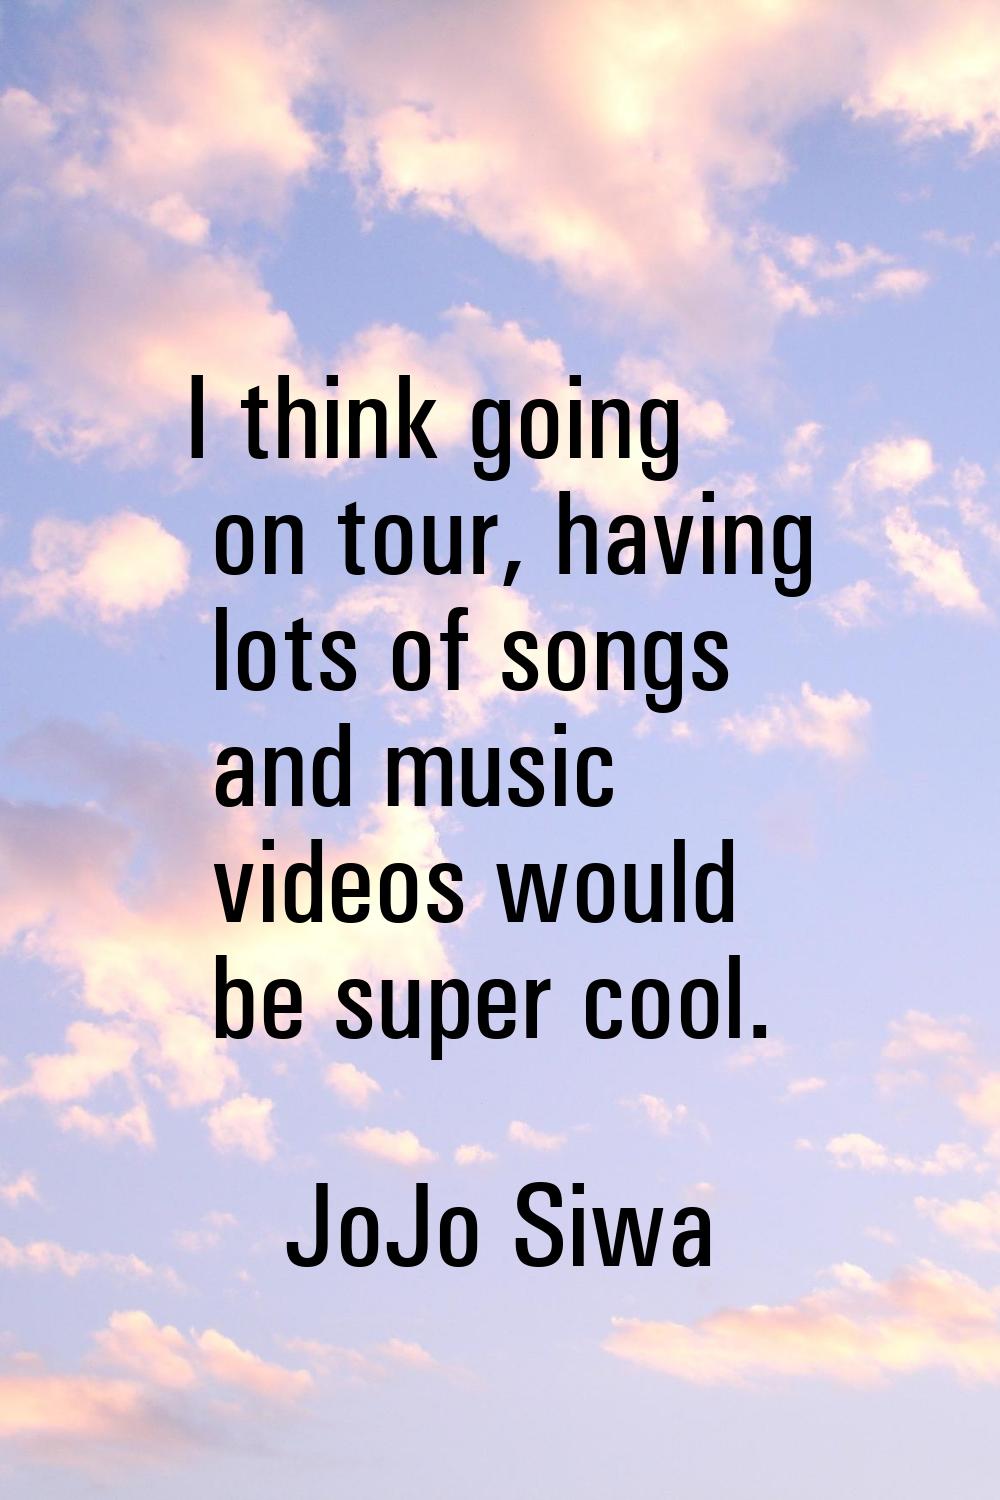 I think going on tour, having lots of songs and music videos would be super cool.